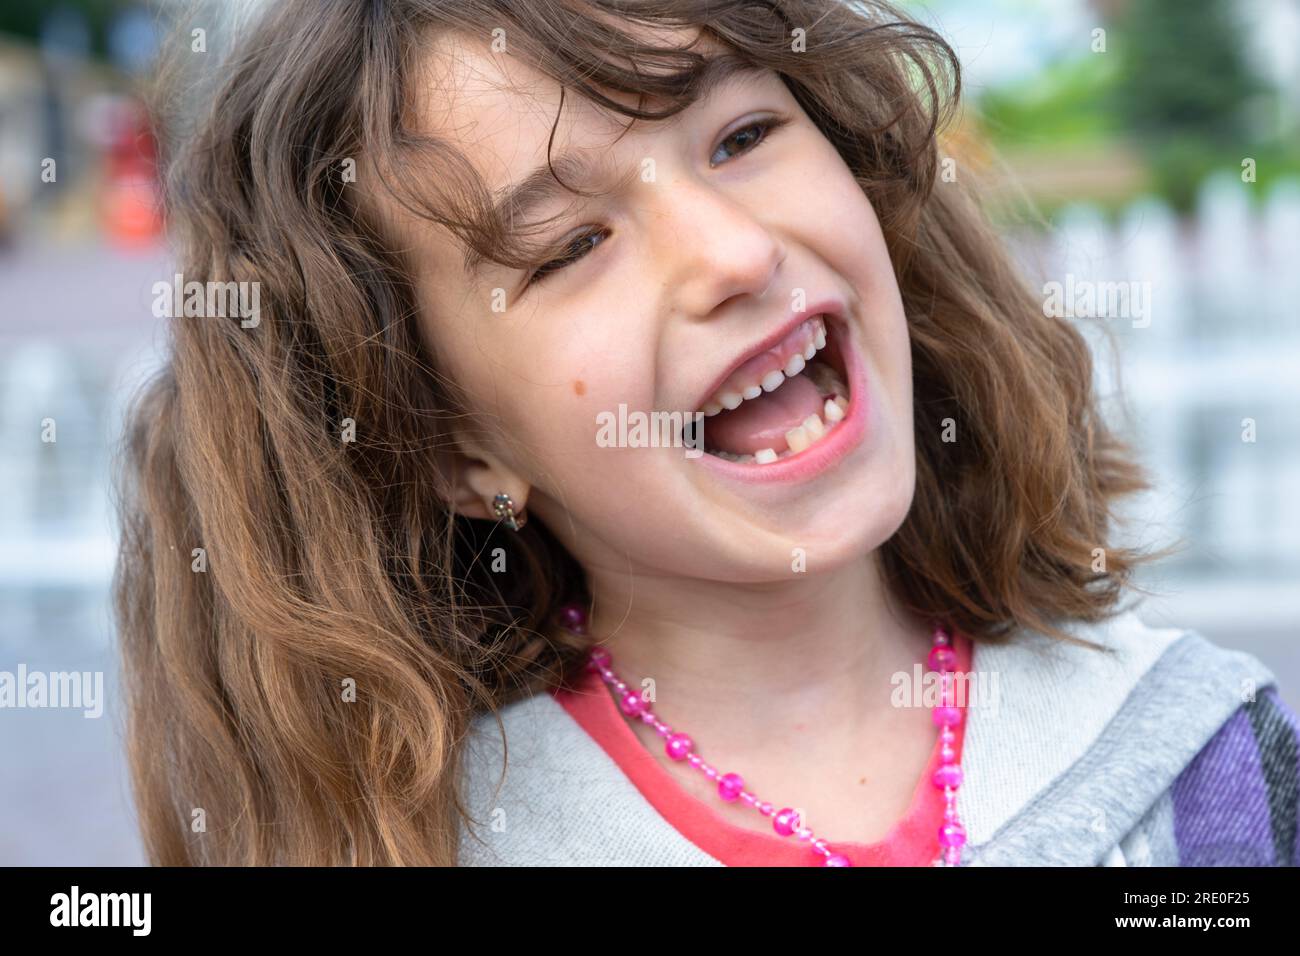 Toothless happy smile of a girl with a fallen lower milk tooth close-up. Changing teeth to molars in childhood Stock Photo